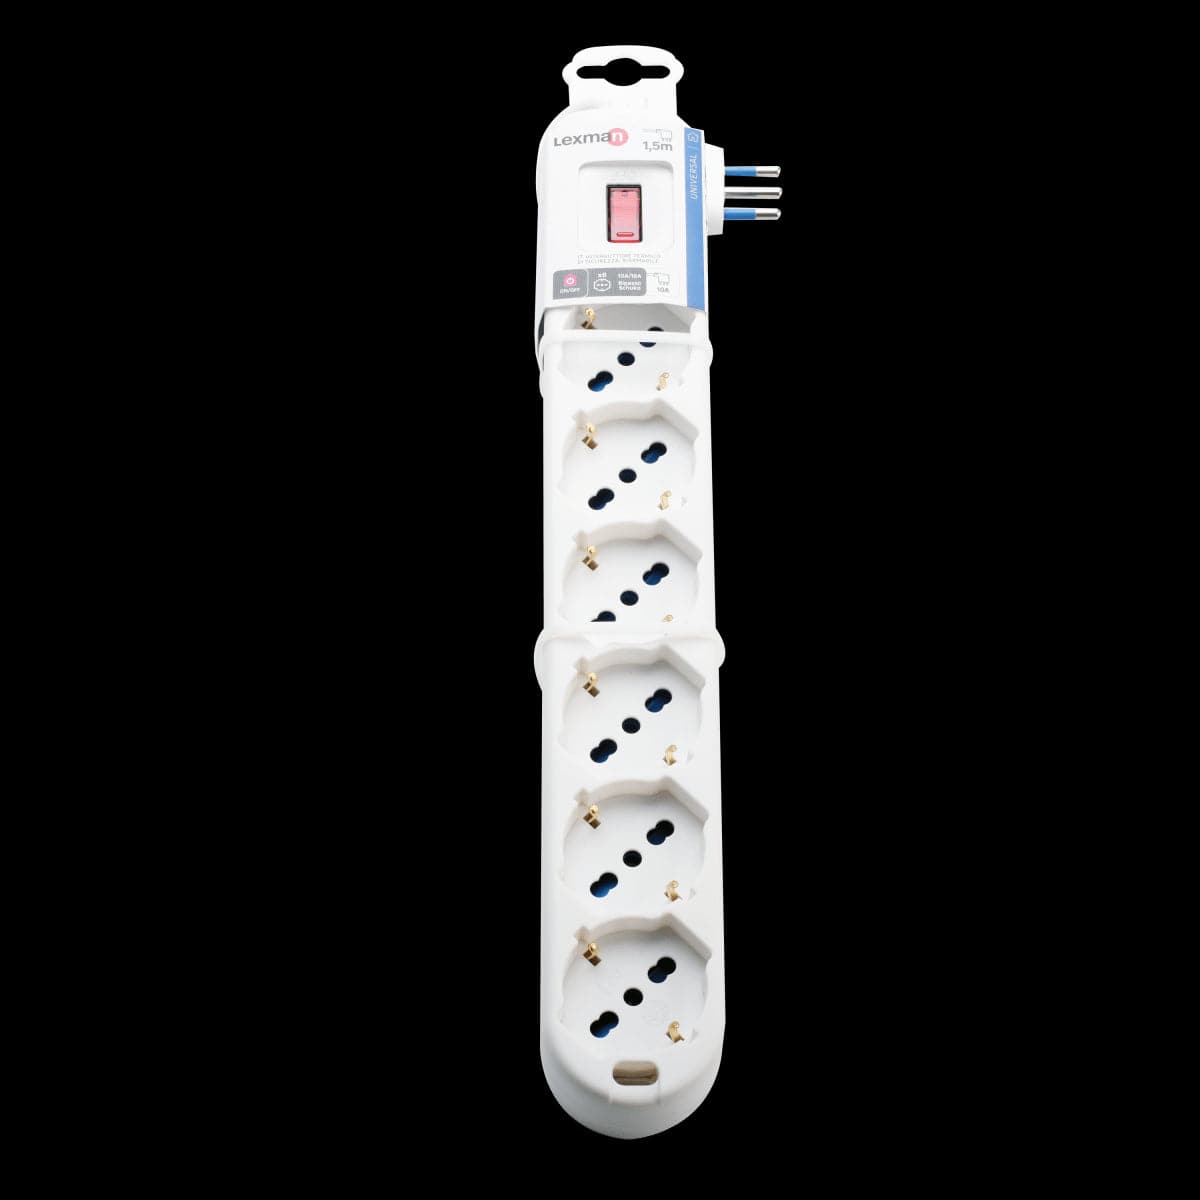 MULTISOCKET6 UNIVERSAL SOCKETS WITH SWITCH AND CABLE